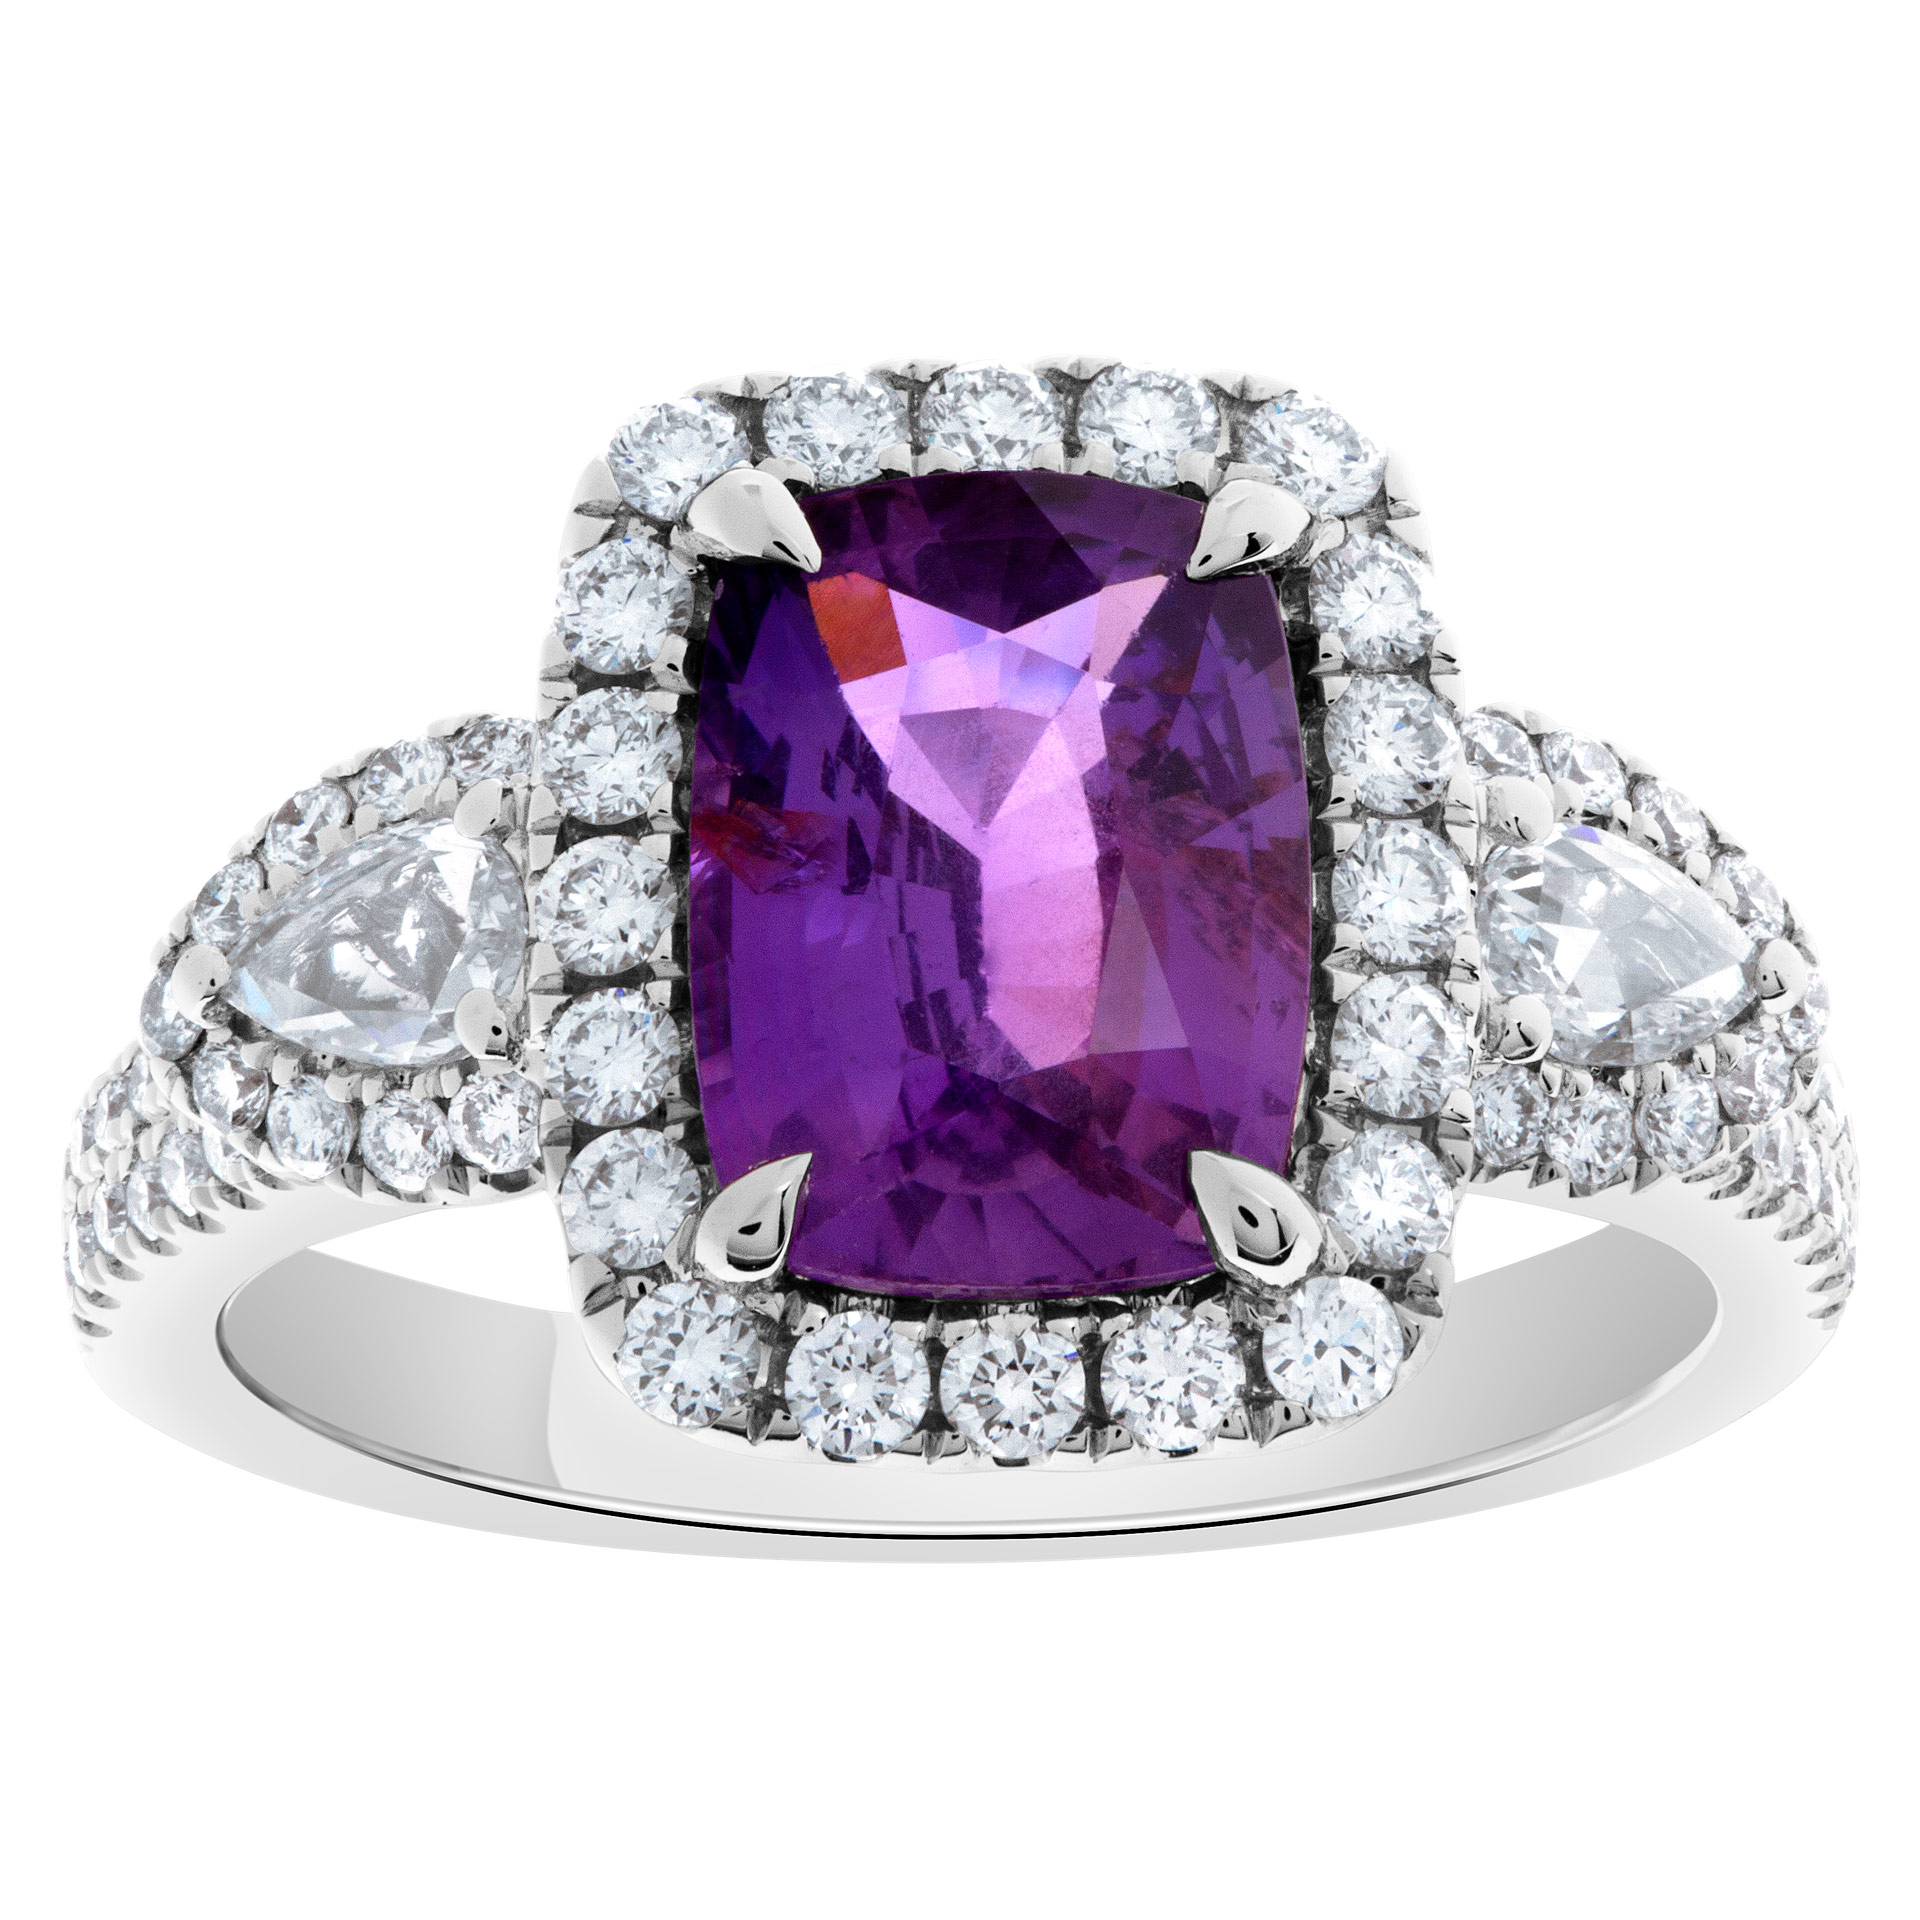 Cushion cut natural purple sapphire and diamond ring set in 18K white gold. image 1